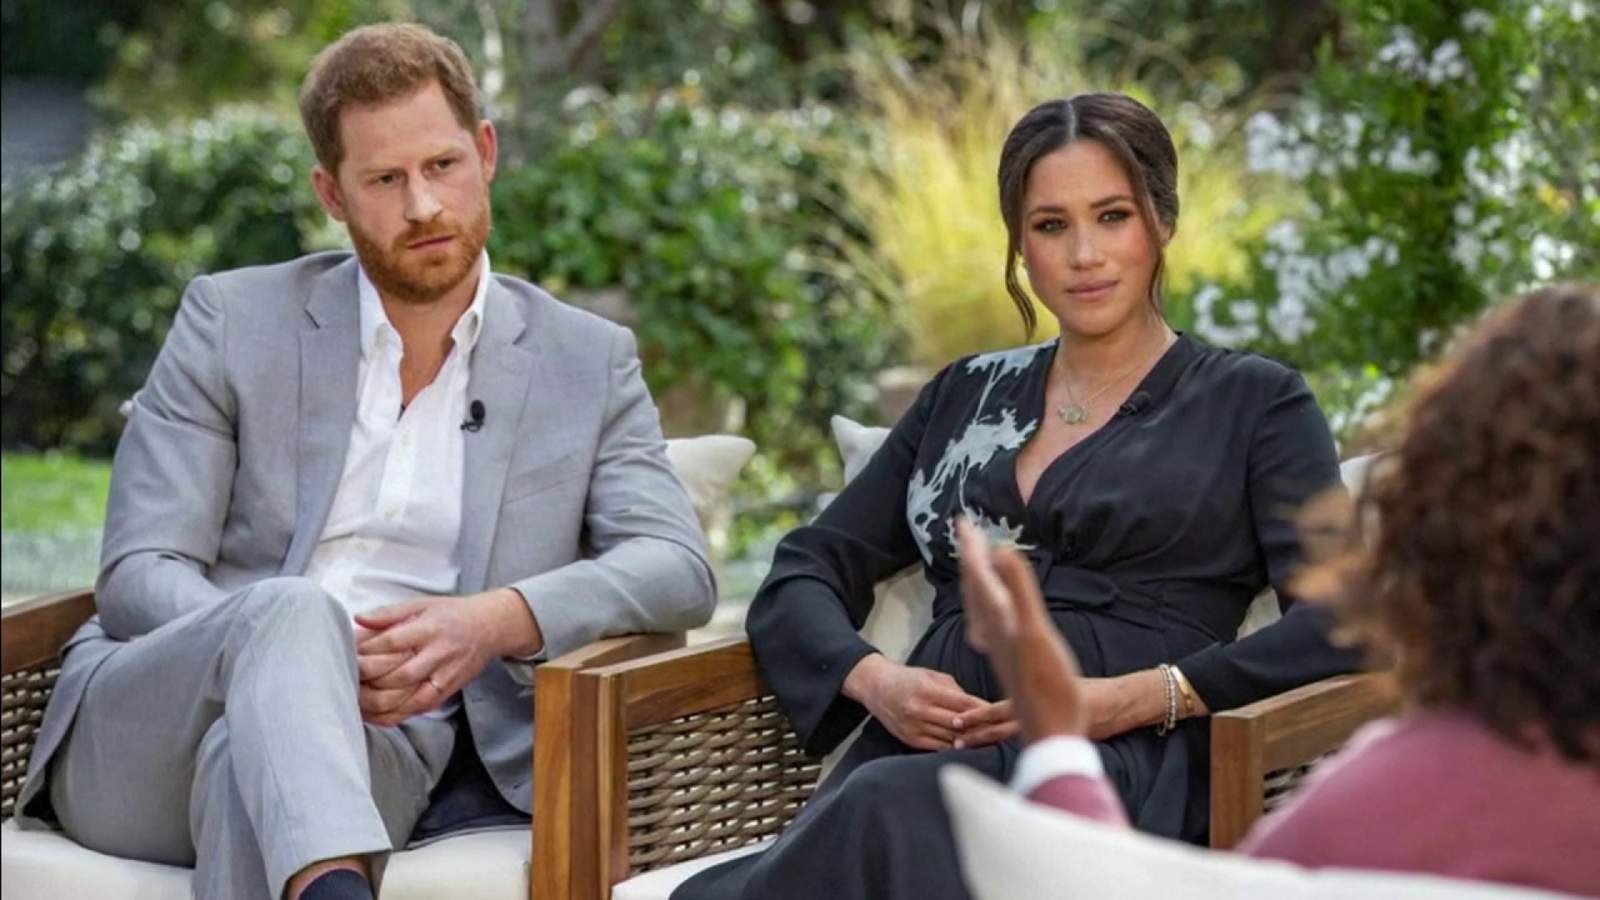 Royal family says Harry, Meghan racism charges 'concerning'